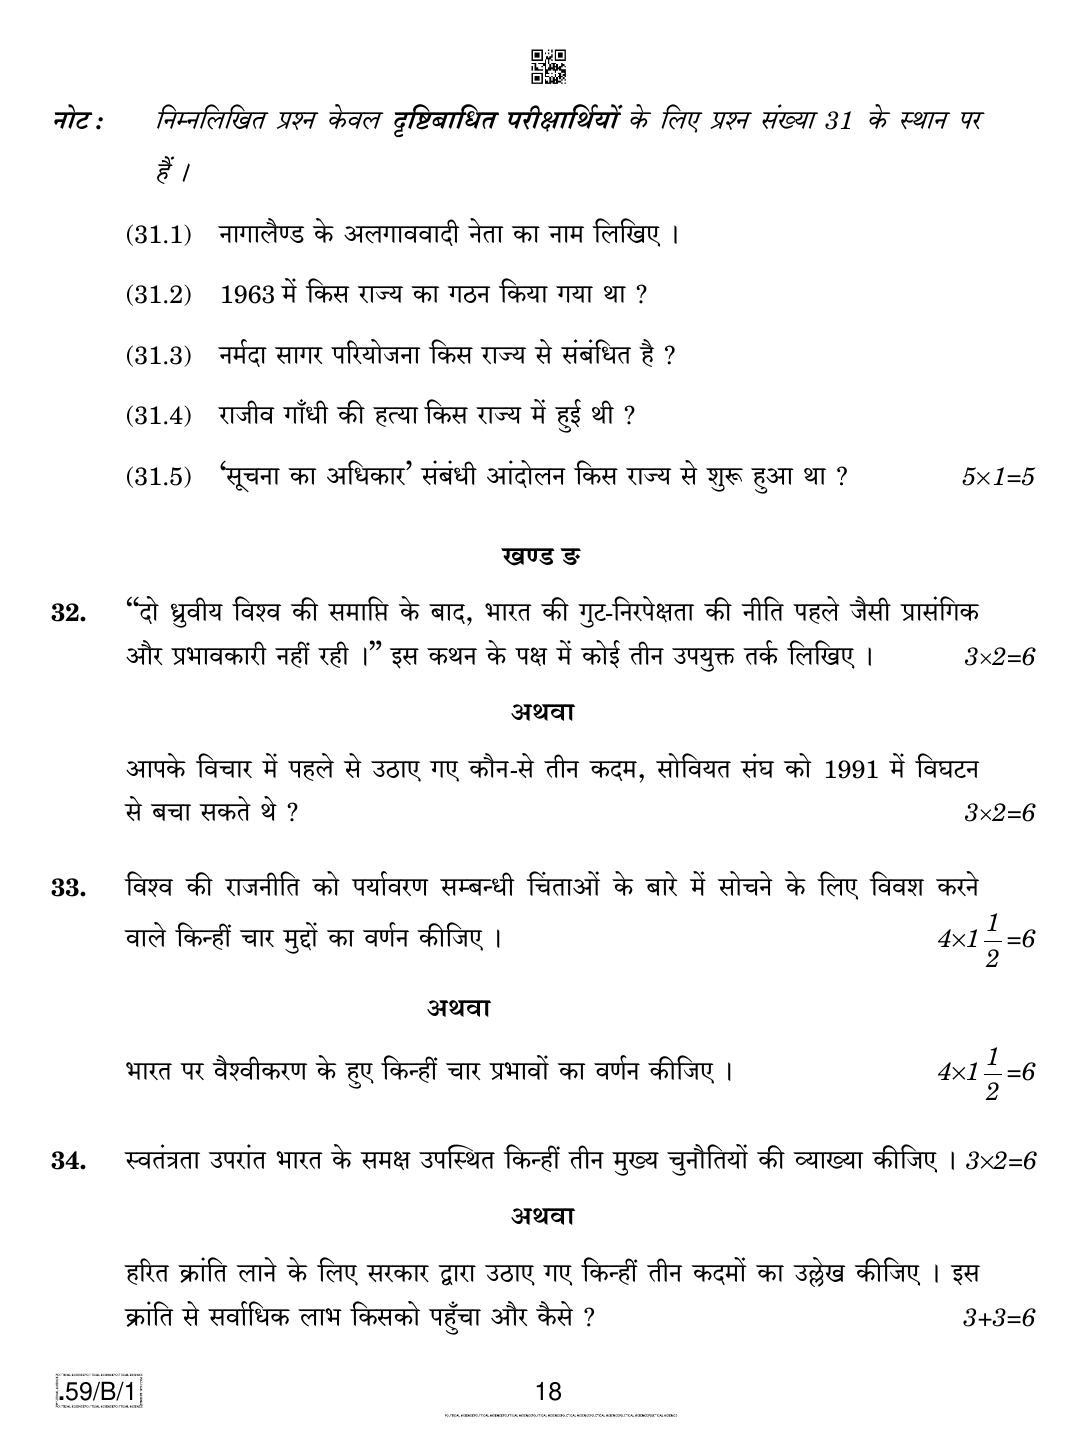 CBSE Class 12 59-C-1 - Political Science 2020 Compartment Question Paper - Page 18